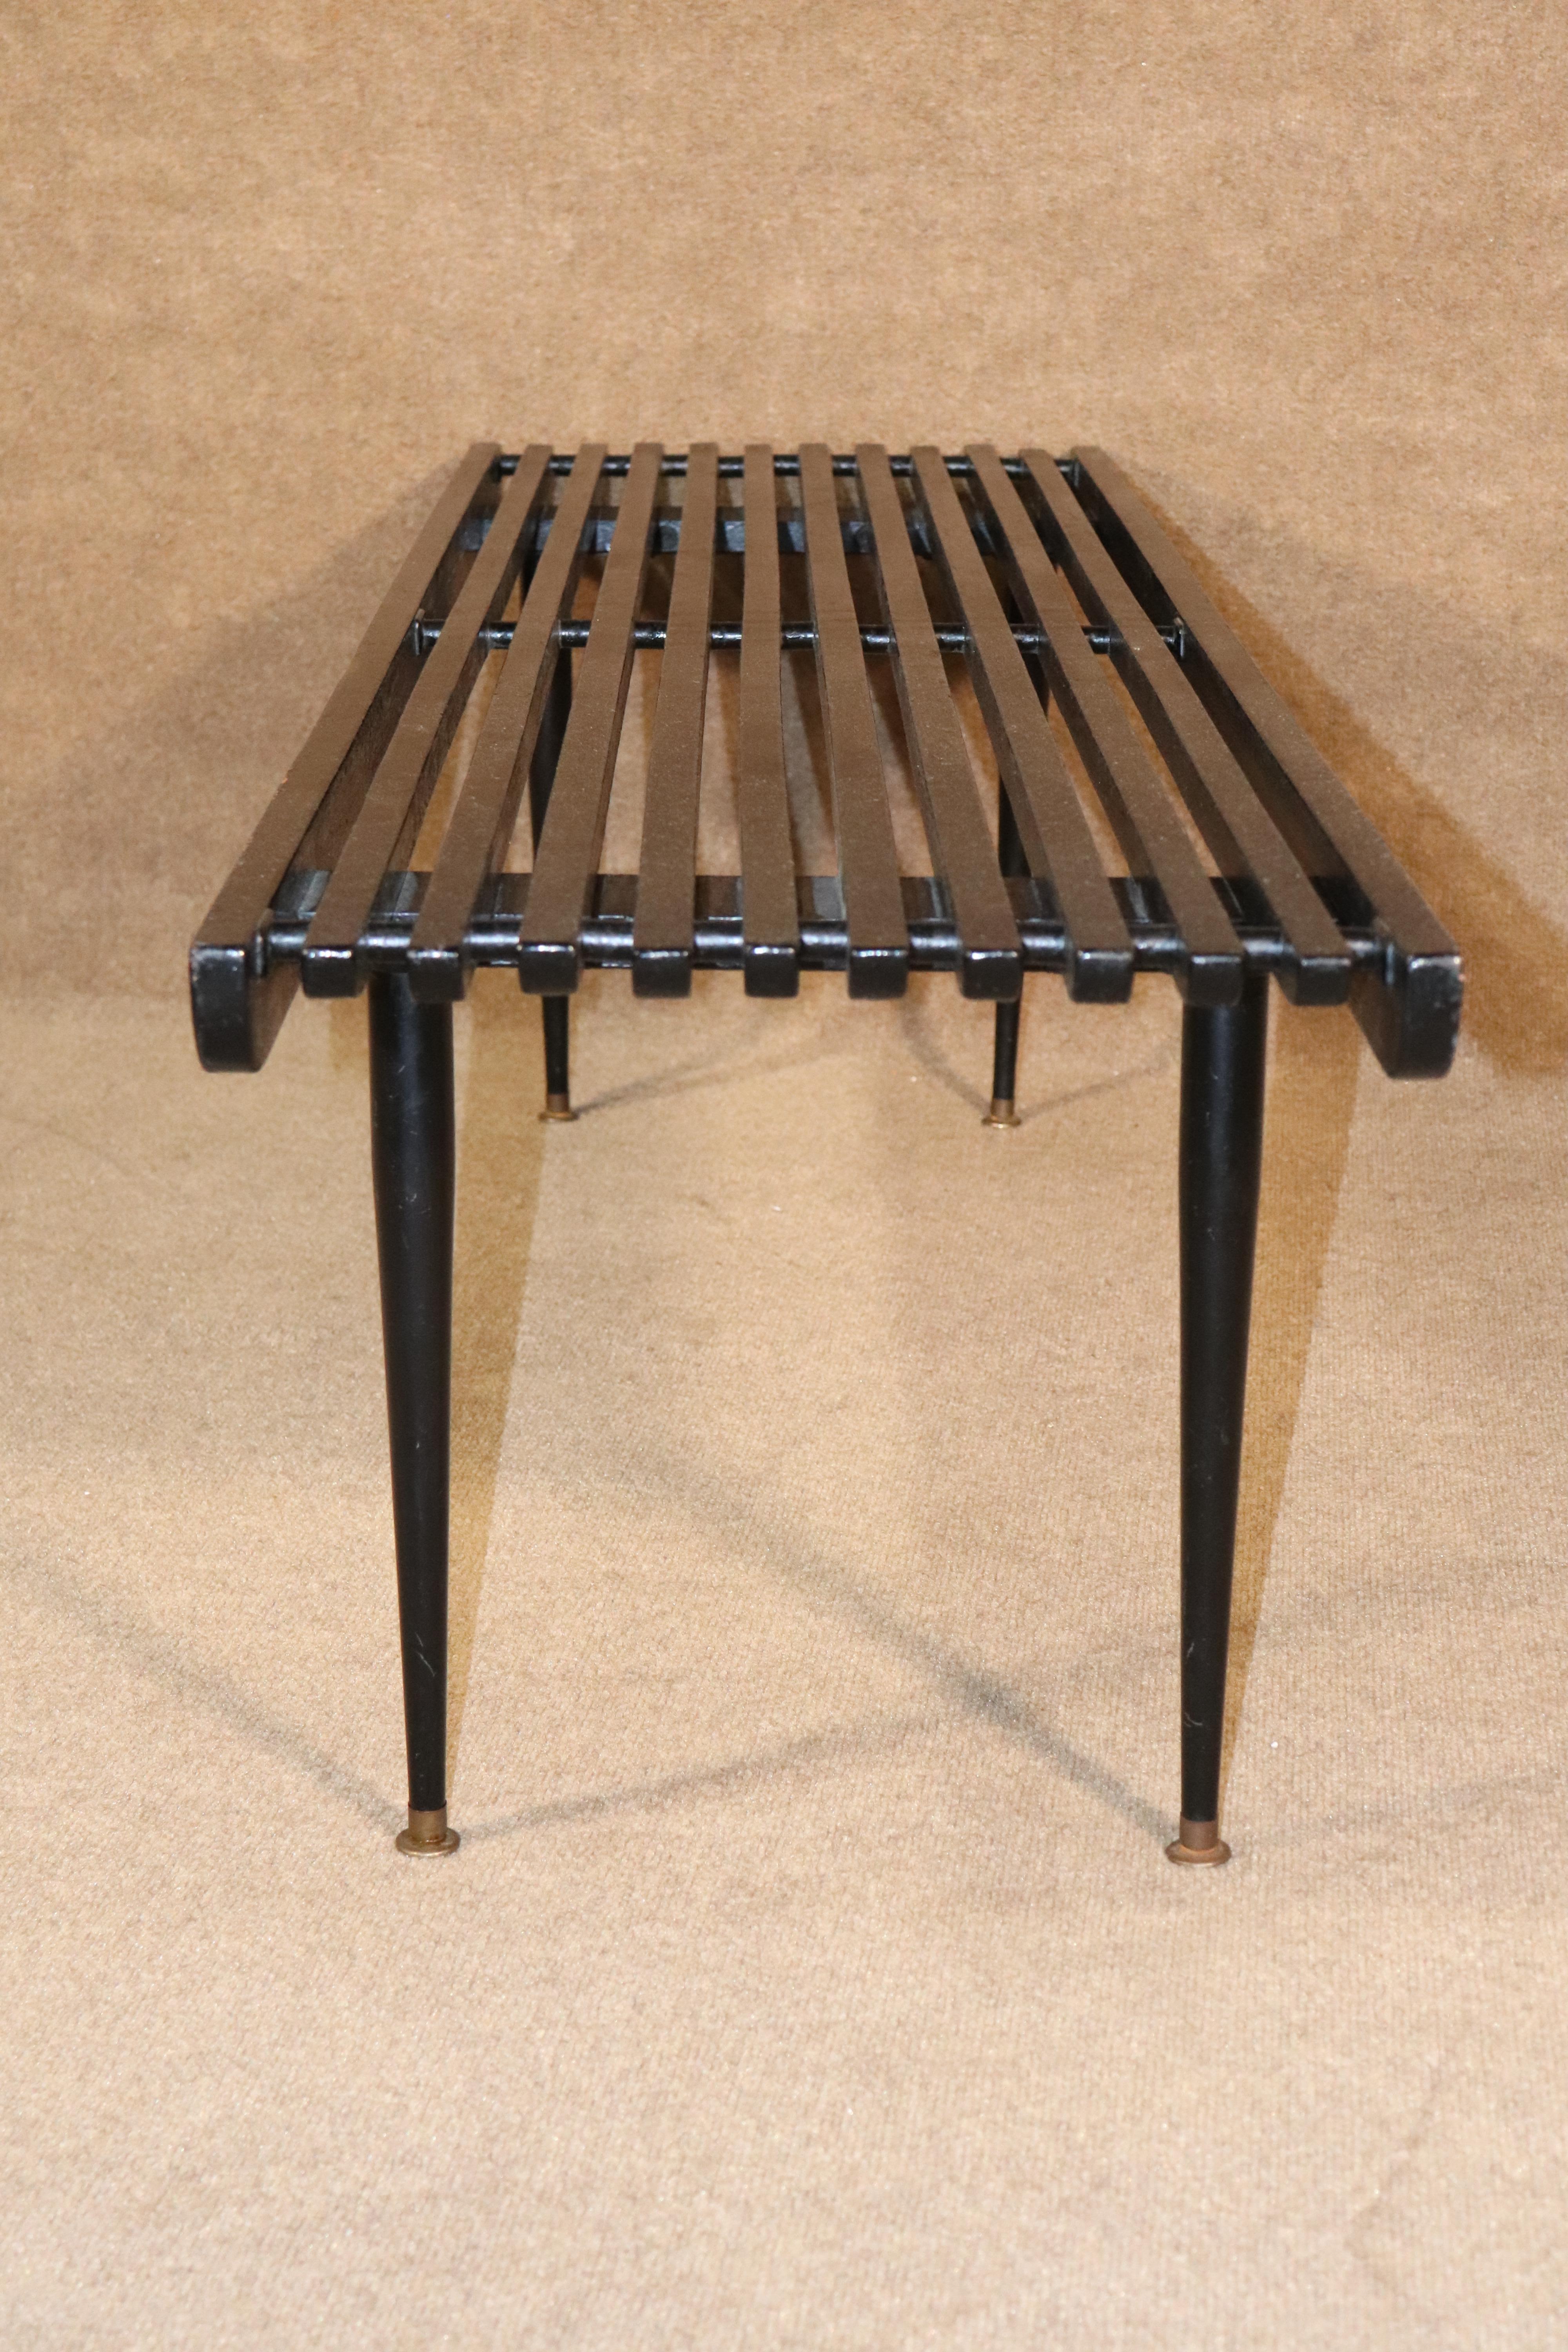 Mid-Century Modern slat bench or coffee table in black. Tapered legs with brass caps.
Please confirm location.